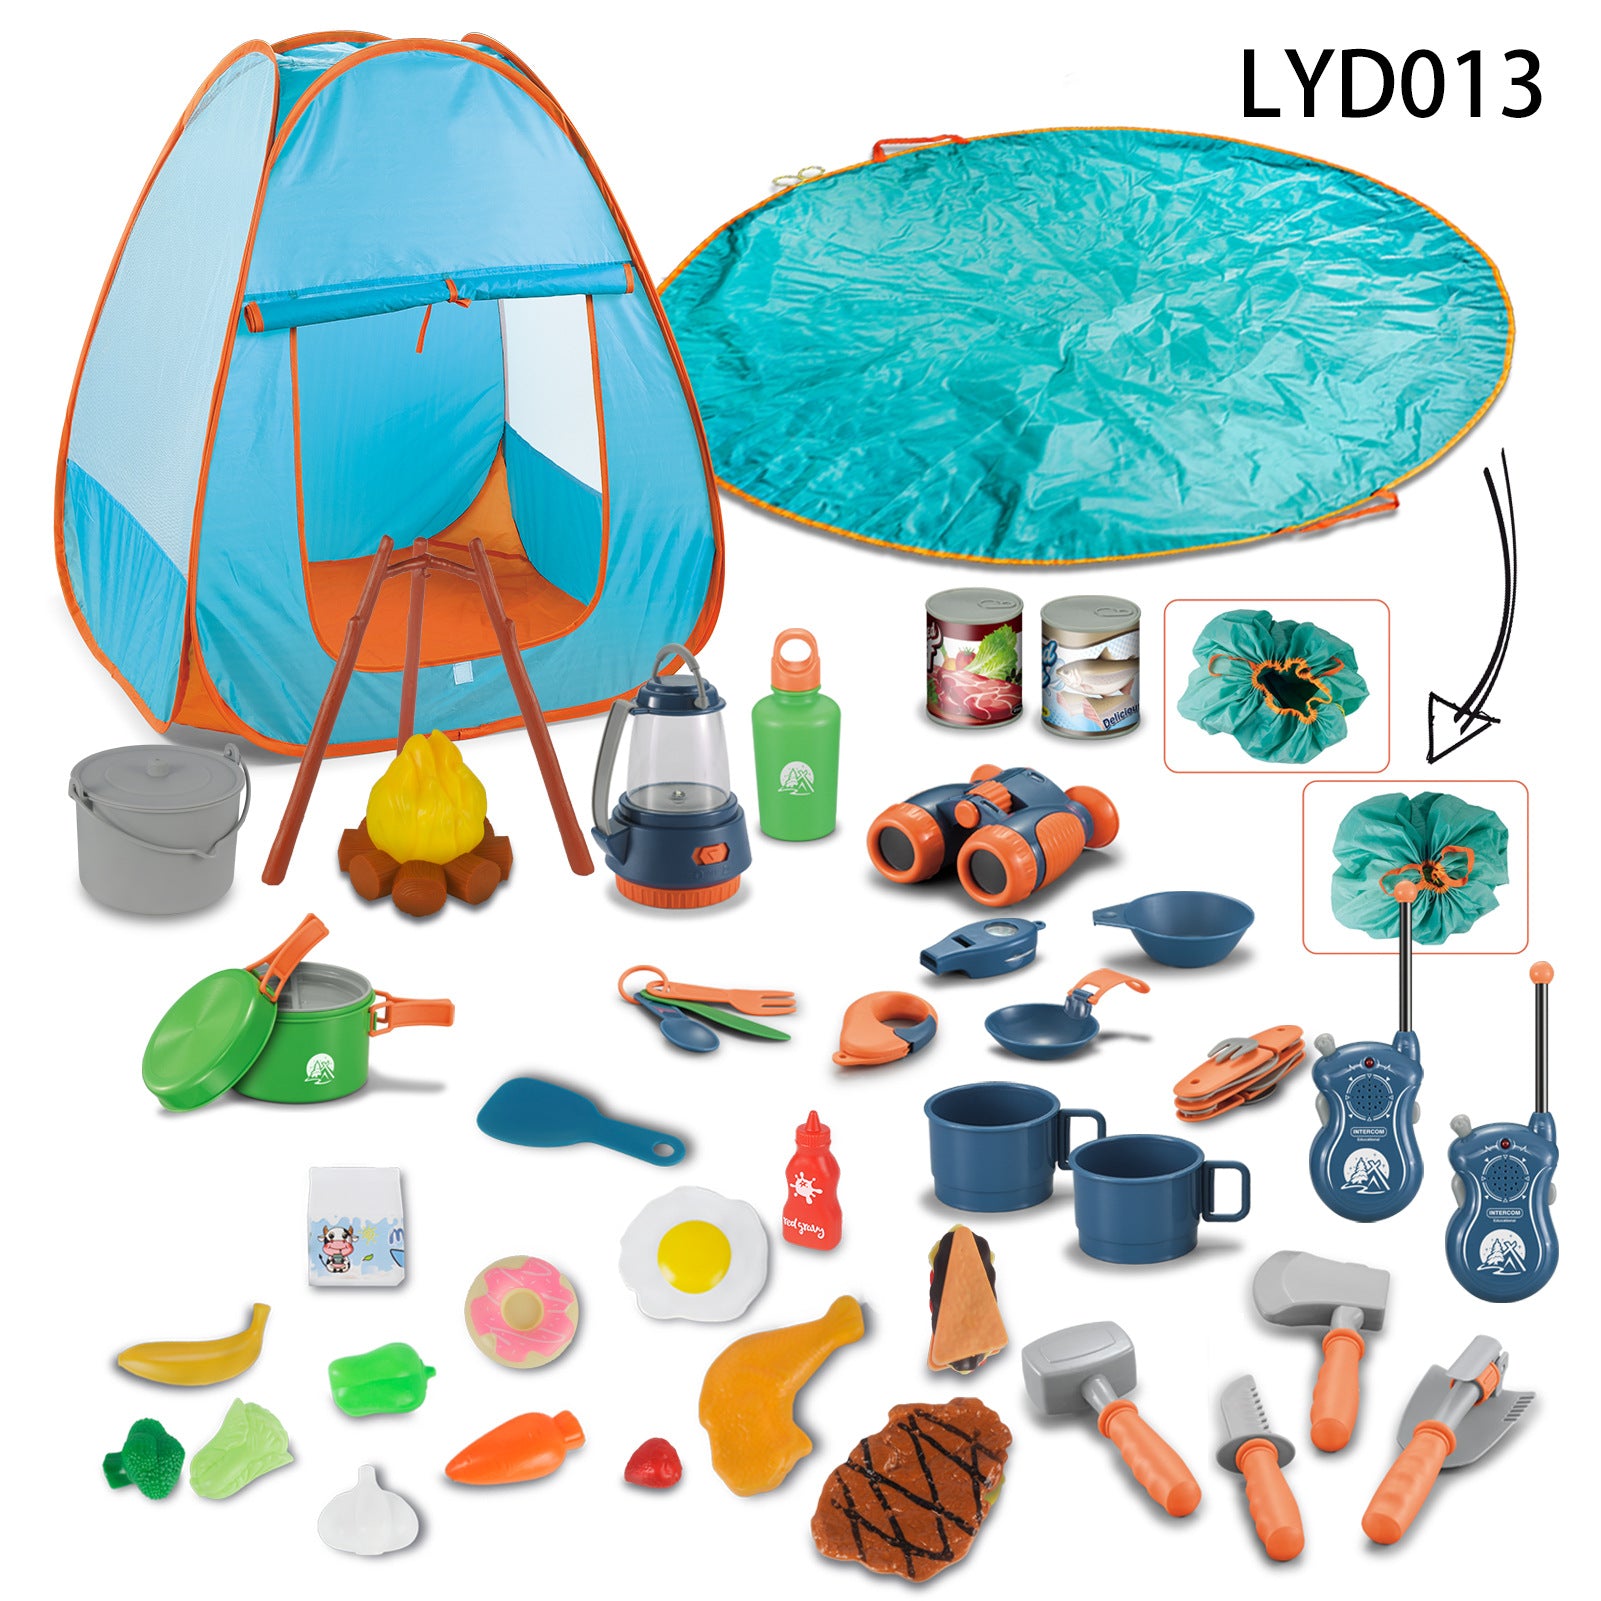 Children's Simulation Camping Tent Play House Toys Outdoor.